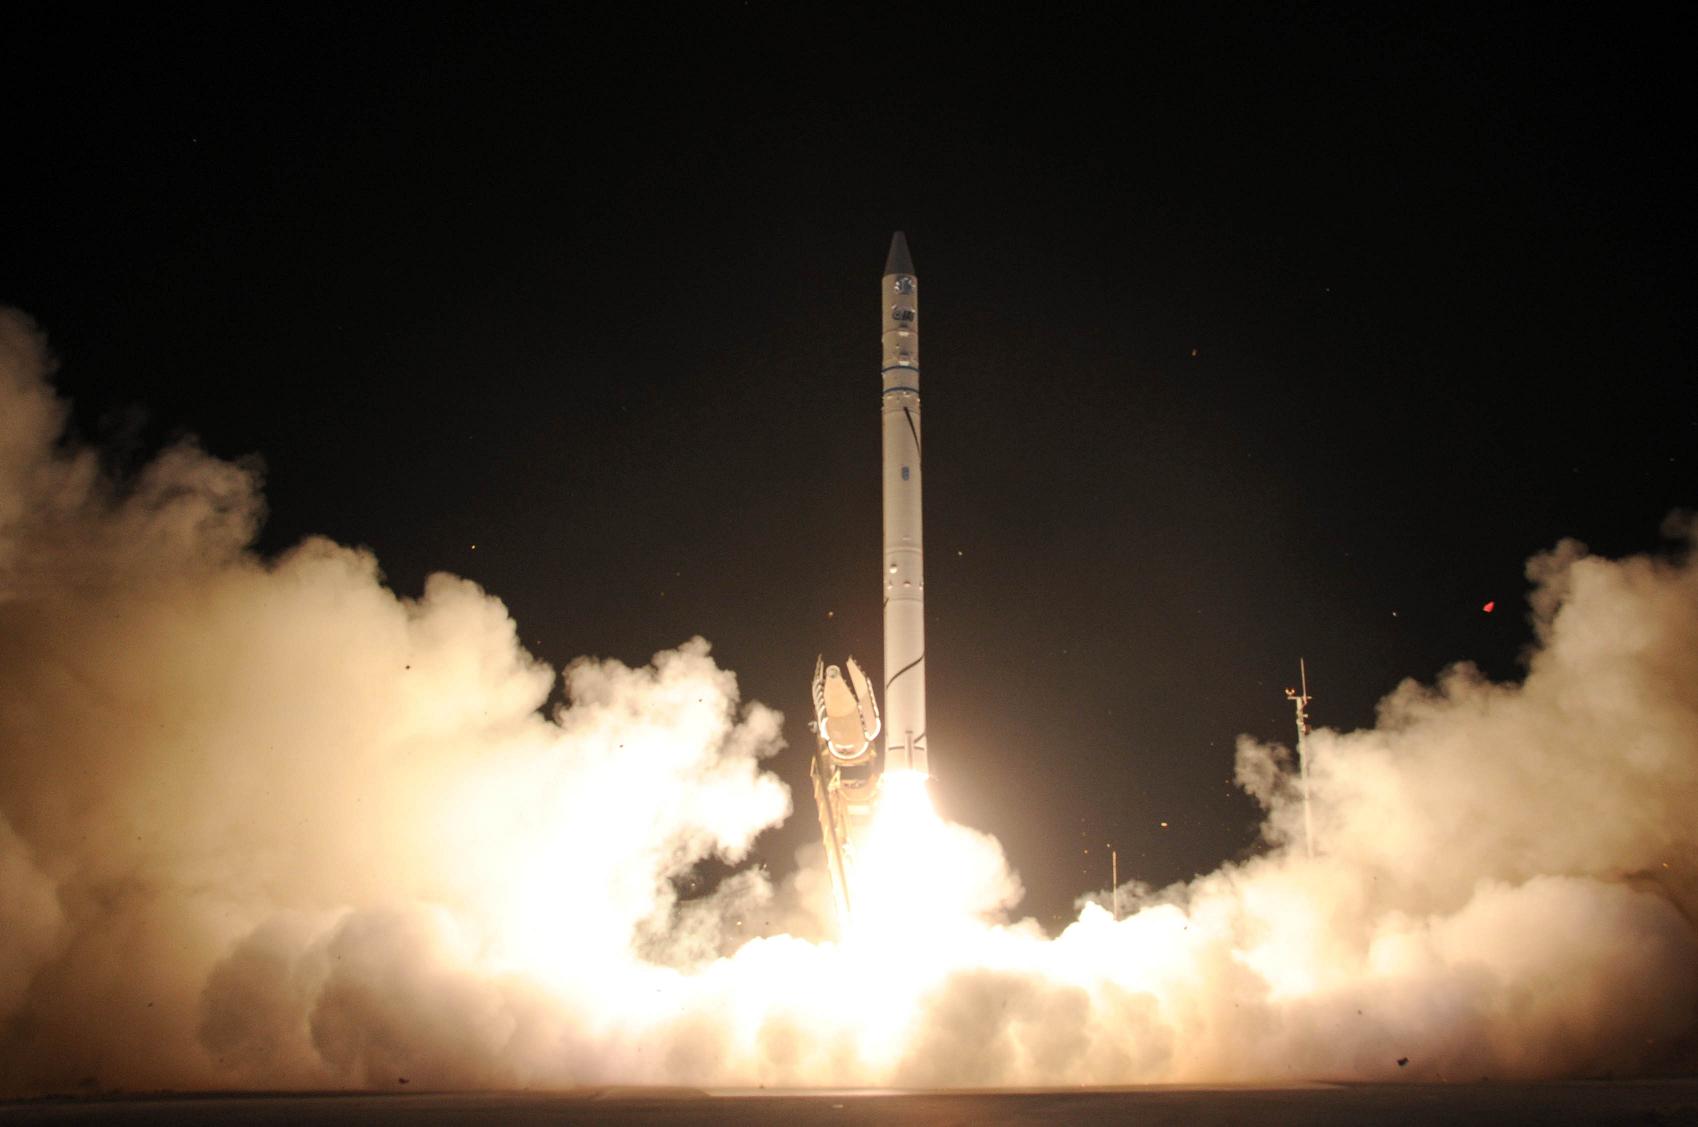 The launch of the Ofek 9 satellite on June 22, 2010, at 22:00 from Palamhim. Photo: Israel Aviation Industry